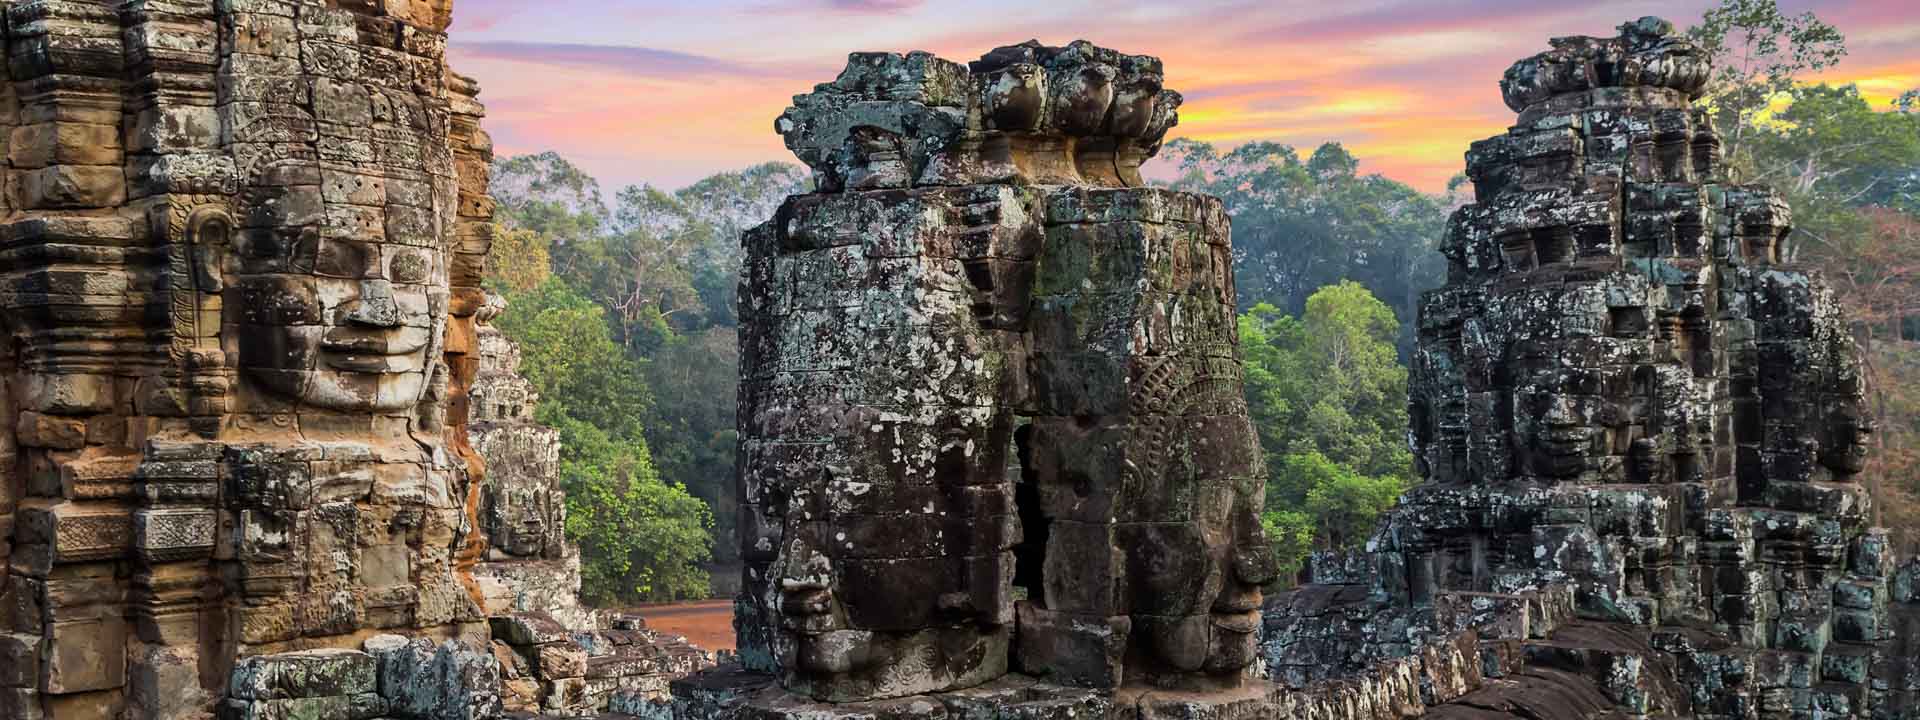 World Heritage Sites Discovery with Laos Vietnam Cambodia Tour 16 days